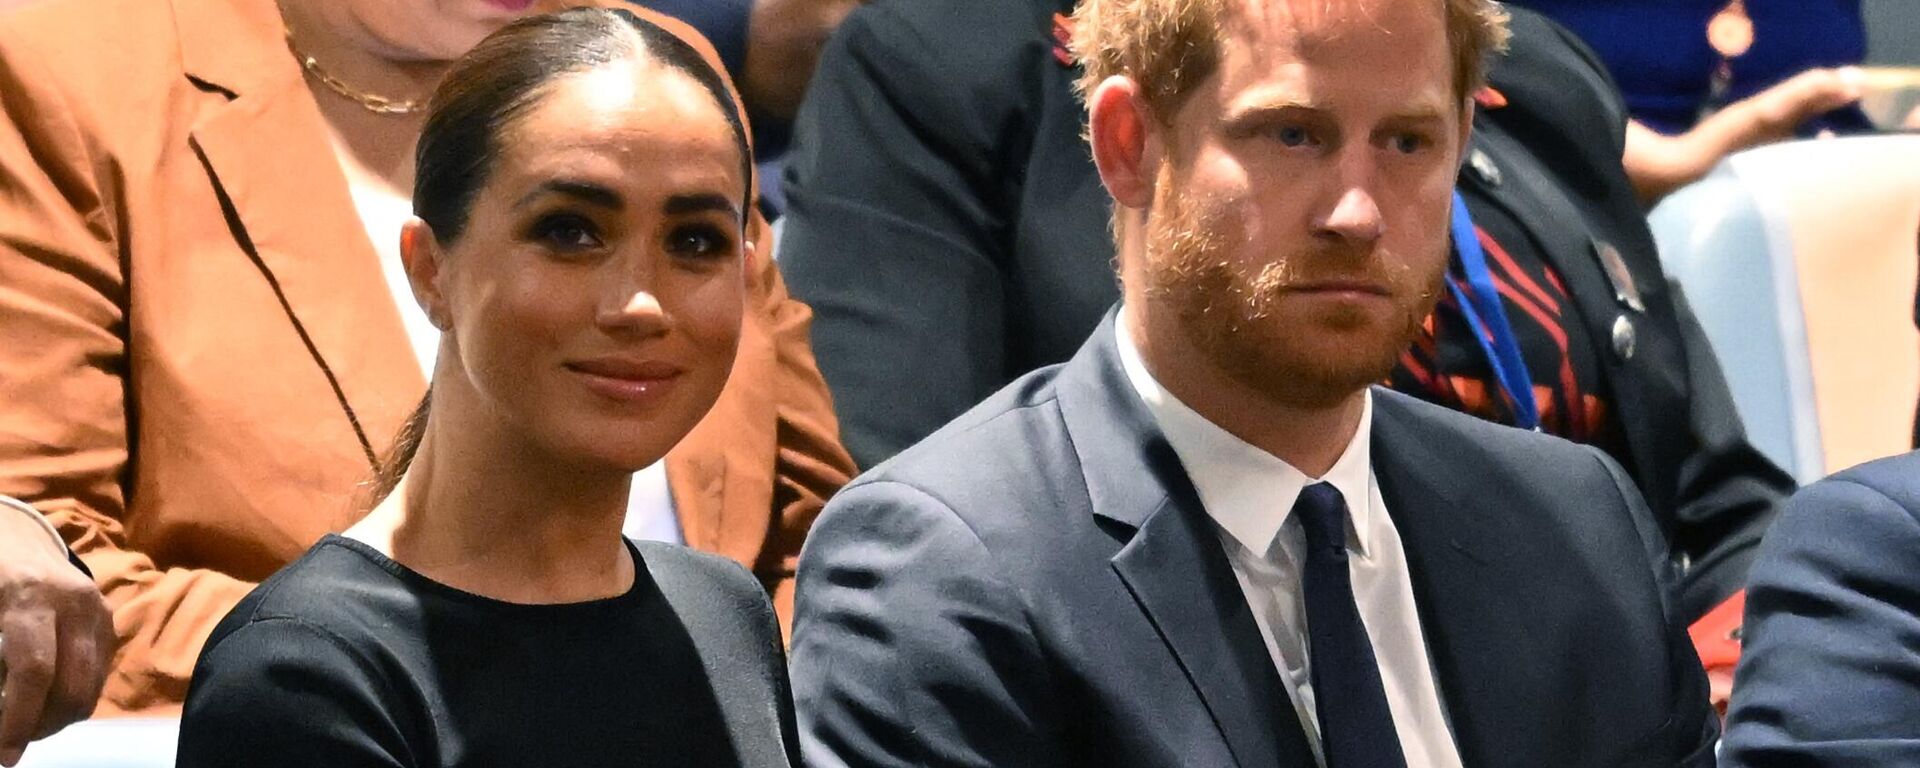 Prince Harry (R) and Meghan Markle (L), the Duke and Duchess of Sussex, attend the 2020 UN Nelson Mandela Prize award ceremony at the United Nations in New York on July 18, 2022 - Sputnik International, 1920, 09.12.2022